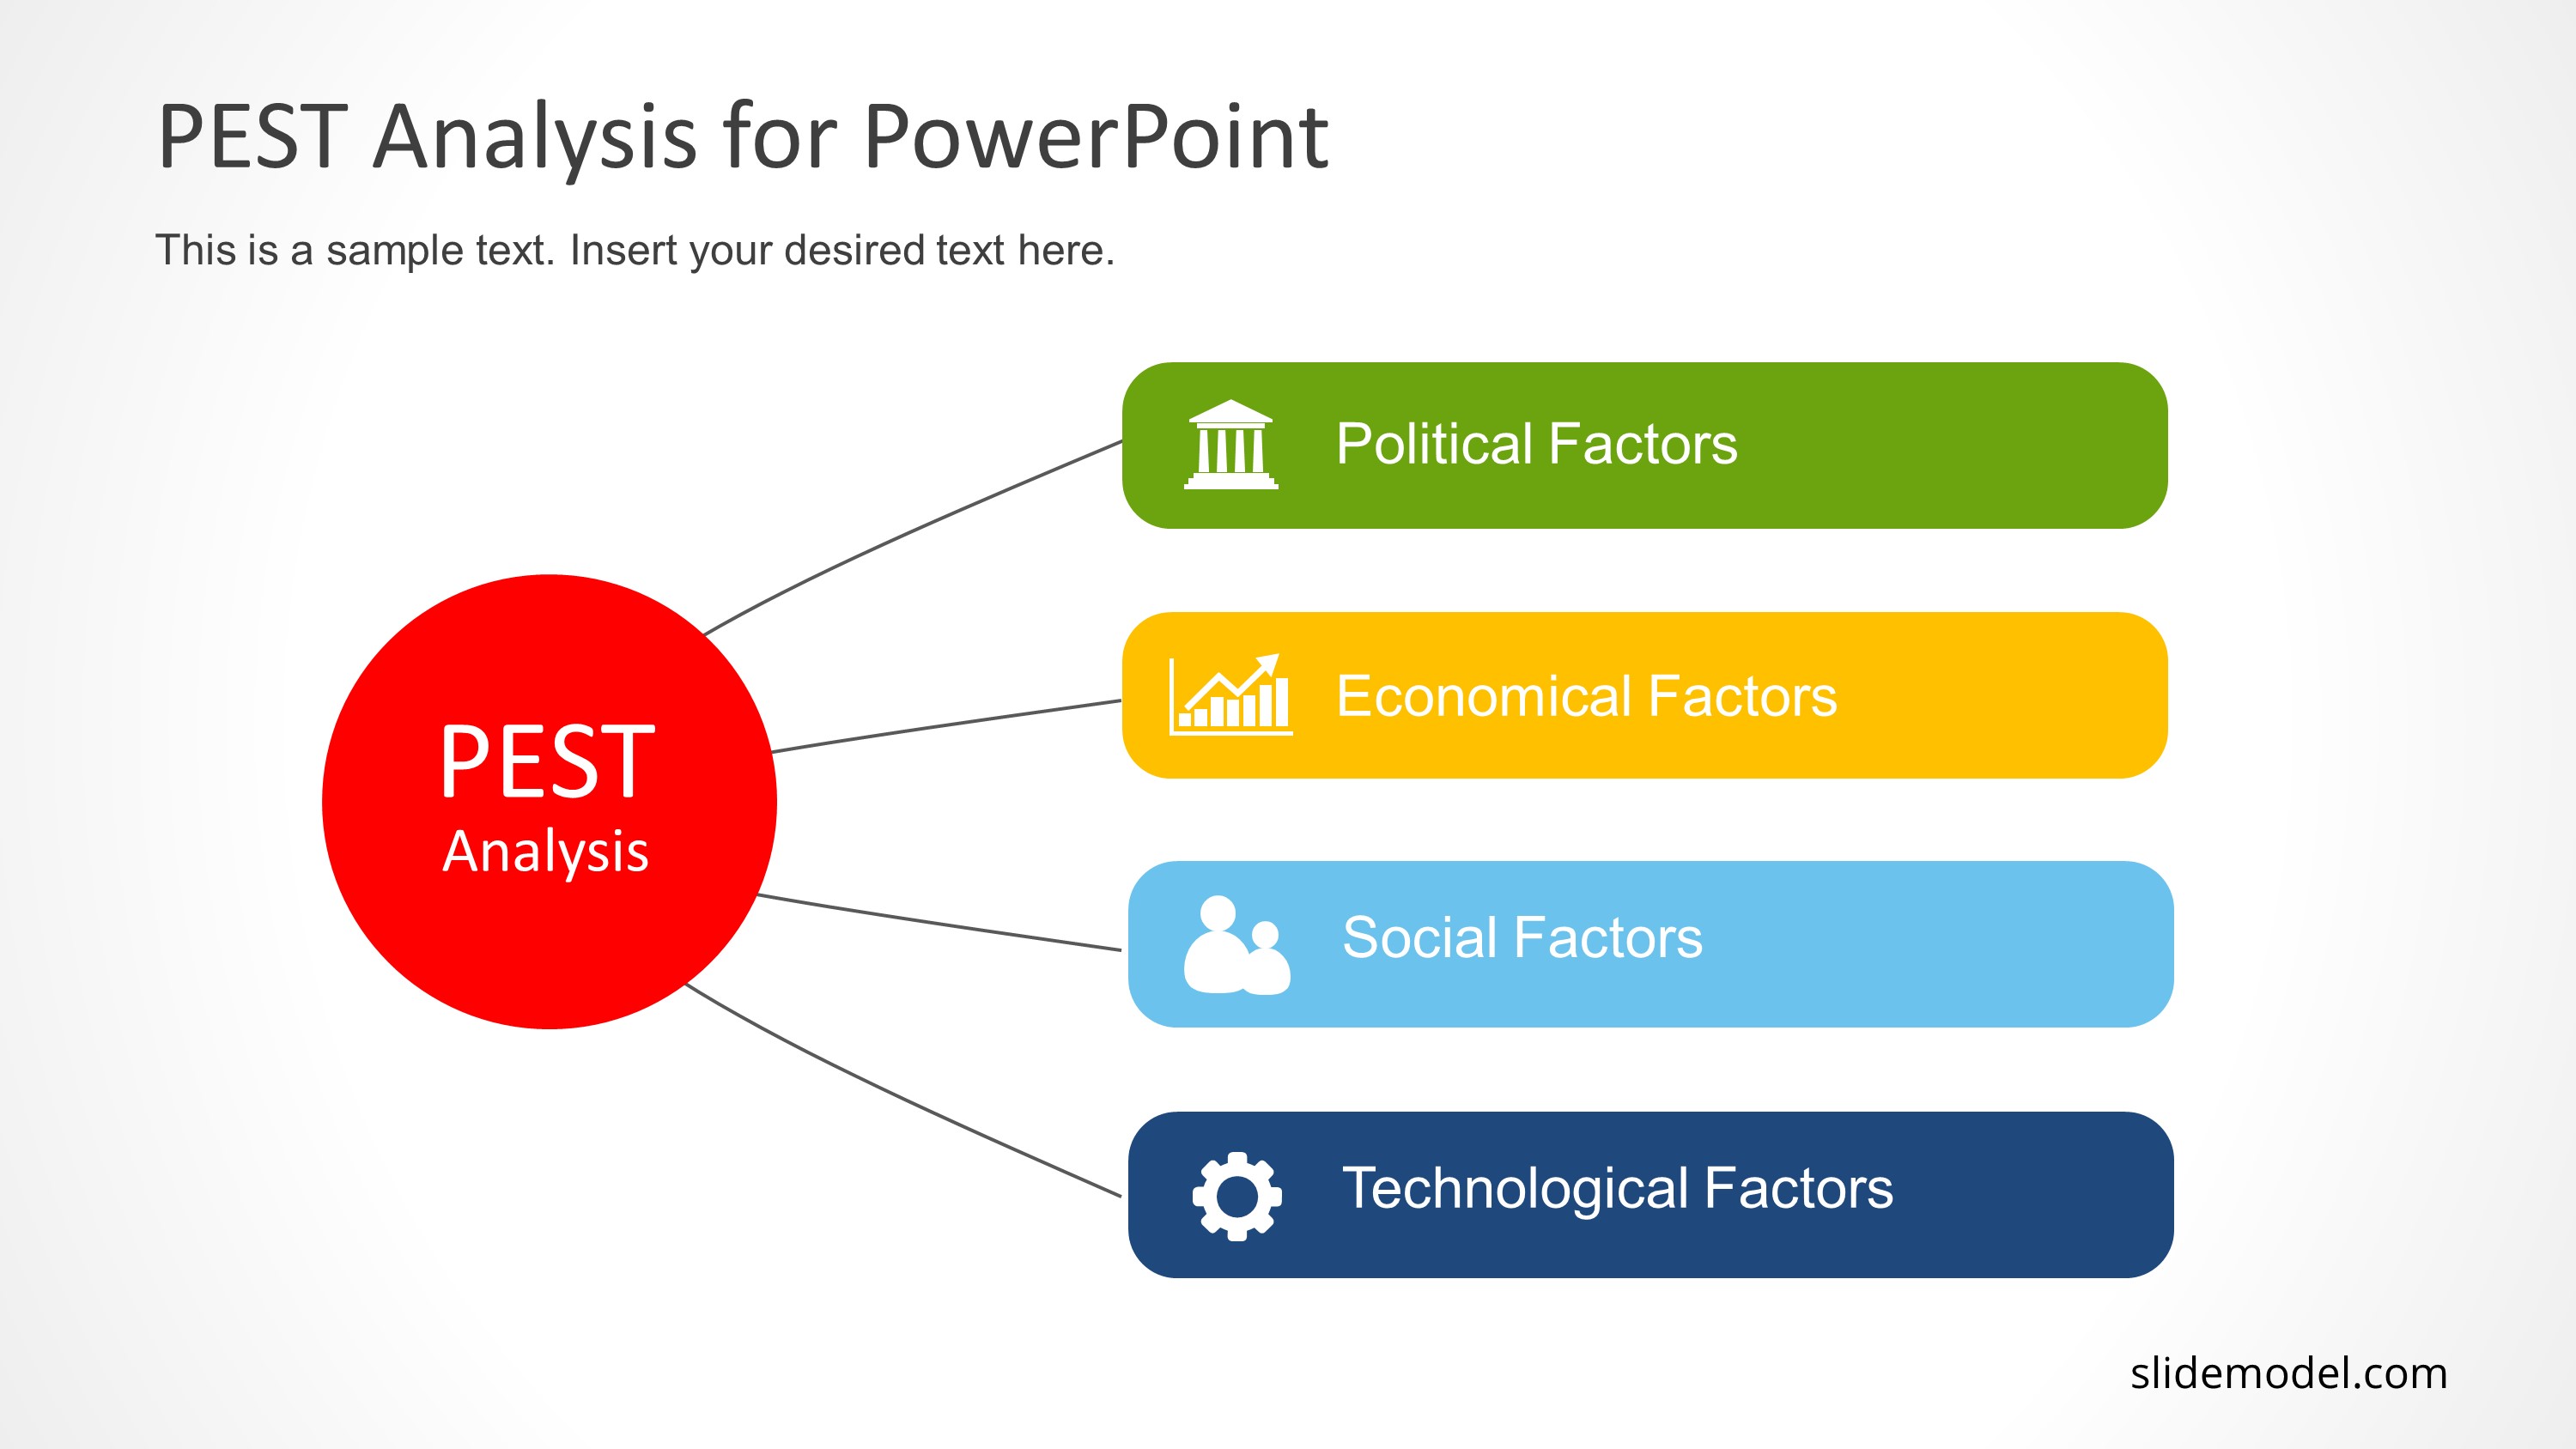 PPT Template for PEST Analysis